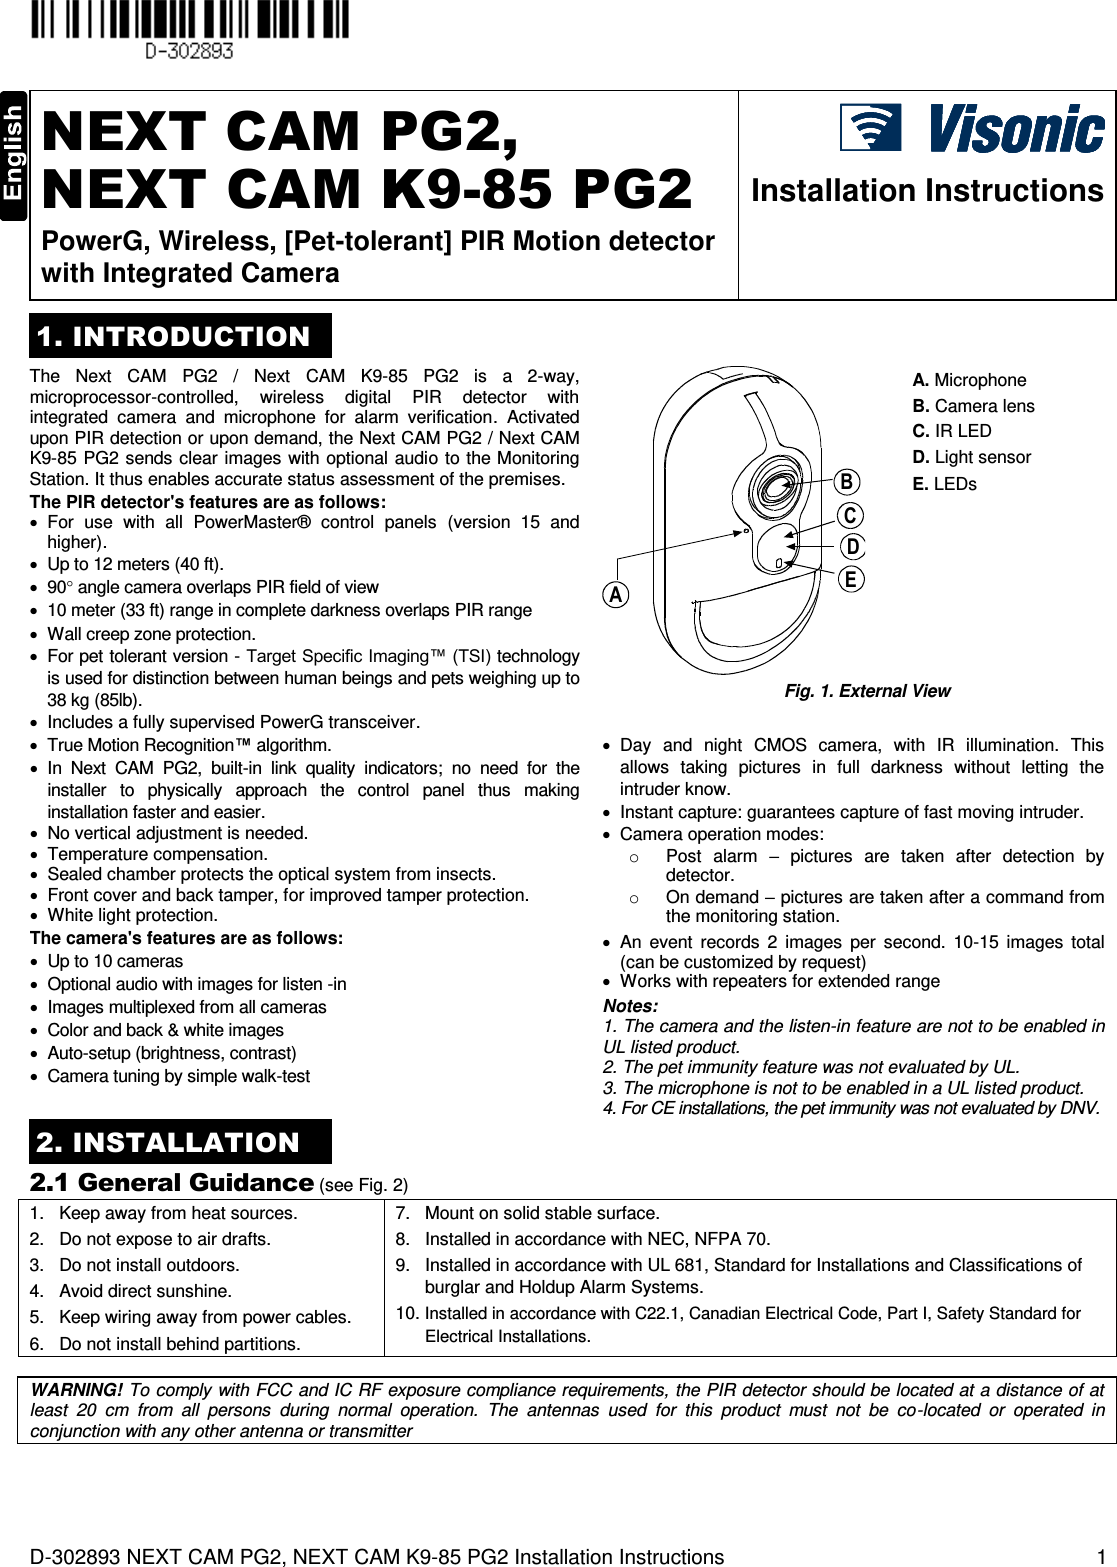  D-302893 NEXT CAM PG2, NEXT CAM K9-85 PG2 Installation Instructions  1  NEXT CAM PG2,  NEXT CAM K9-85 PG2 PowerG, Wireless, [Pet-tolerant] PIR Motion detector with Integrated Camera  Installation Instructions 1. INTRODUCTION The  Next  CAM  PG2  /  Next  CAM  K9-85  PG2  is  a  2-way, microprocessor-controlled,  wireless  digital  PIR  detector  with integrated  camera  and  microphone  for  alarm  verification.  Activated upon PIR detection or upon demand, the Next CAM PG2 / Next CAM K9-85 PG2 sends clear images with optional audio  to the Monitoring Station. It thus enables accurate status assessment of the premises. The PIR detector&apos;s features are as follows:   For  use  with  all  PowerMaster®  control  panels  (version  15  and higher).   Up to 12 meters (40 ft).  90 angle camera overlaps PIR field of view   10 meter (33 ft) range in complete darkness overlaps PIR range   Wall creep zone protection.   For pet tolerant version - Target Specific Imaging™ (TSI) technology is used for distinction between human beings and pets weighing up to 38 kg (85lb).   Includes a fully supervised PowerG transceiver. BACDE A. Microphone B. Camera lens C. IR LED D. Light sensor E. LEDs  Fig. 1. External View   True Motion Recognition™ algorithm.   In  Next  CAM  PG2,  built-in  link  quality  indicators;  no  need  for  the installer  to  physically  approach  the  control  panel  thus  making installation faster and easier.   No vertical adjustment is needed.   Temperature compensation.   Sealed chamber protects the optical system from insects.   Front cover and back tamper, for improved tamper protection.   White light protection. The camera&apos;s features are as follows:   Up to 10 cameras   Optional audio with images for listen -in   Images multiplexed from all cameras   Color and back &amp; white images   Auto-setup (brightness, contrast)   Camera tuning by simple walk-test   Day  and  night  CMOS  camera,  with  IR  illumination.  This allows  taking  pictures  in  full  darkness  without  letting  the intruder know.   Instant capture: guarantees capture of fast moving intruder.    Camera operation modes: o  Post  alarm  –  pictures  are  taken  after  detection  by detector. o  On demand – pictures are taken after a command from the monitoring station.   An  event  records  2  images  per  second.  10-15  images  total (can be customized by request)   Works with repeaters for extended range Notes: 1. The camera and the listen-in feature are not to be enabled in UL listed product. 2. The pet immunity feature was not evaluated by UL. 3. The microphone is not to be enabled in a UL listed product. 4. For CE installations, the pet immunity was not evaluated by DNV. 2. INSTALLATION 2.1 General Guidance (see Fig. 2) 1.   Keep away from heat sources. 2.   Do not expose to air drafts. 3.   Do not install outdoors. 4.   Avoid direct sunshine. 5.   Keep wiring away from power cables. 6.   Do not install behind partitions. 7.   Mount on solid stable surface. 8.   Installed in accordance with NEC, NFPA 70. 9.   Installed in accordance with UL 681, Standard for Installations and Classifications of burglar and Holdup Alarm Systems. 10. Installed in accordance with C22.1, Canadian Electrical Code, Part I, Safety Standard for Electrical Installations.  WARNING! To comply with FCC and IC RF exposure compliance requirements, the PIR detector should be located at a distance of at least  20  cm  from  all  persons  during  normal  operation.  The  antennas  used  for  this  product  must  not  be  co-located  or  operated  in conjunction with any other antenna or transmitter 